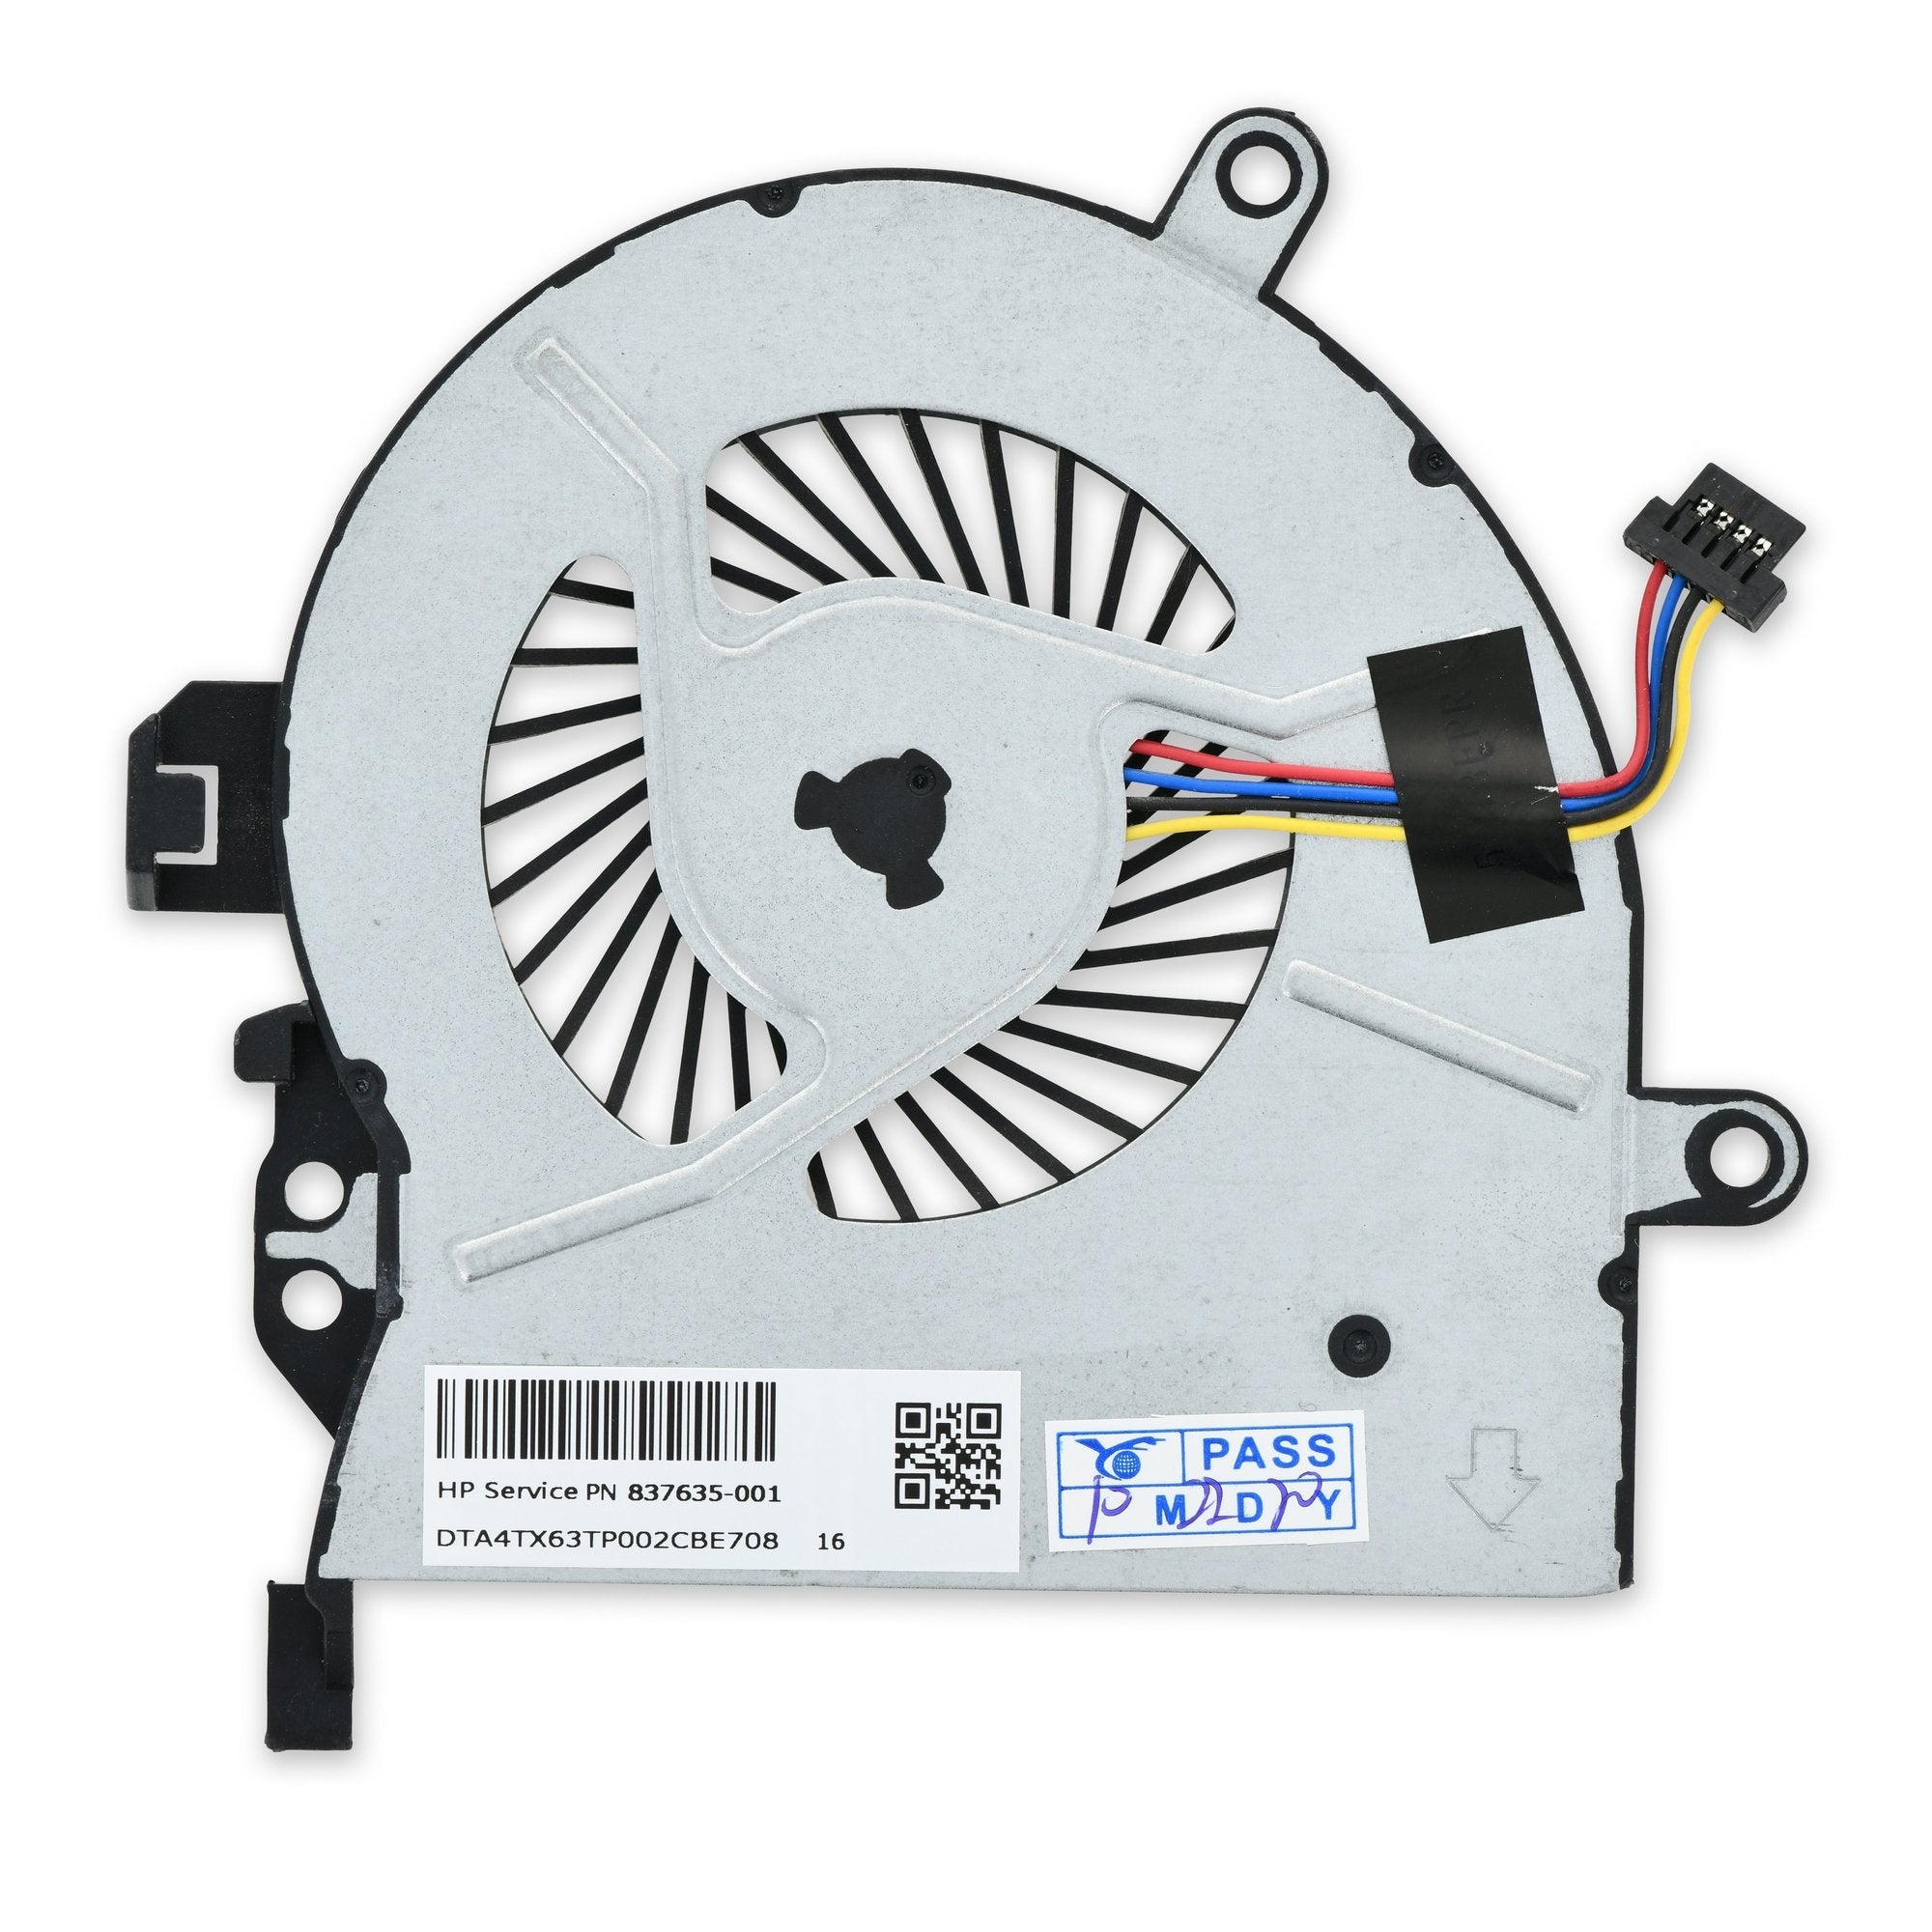 HP ProBook 450, 455, and 470 G3 Fan New